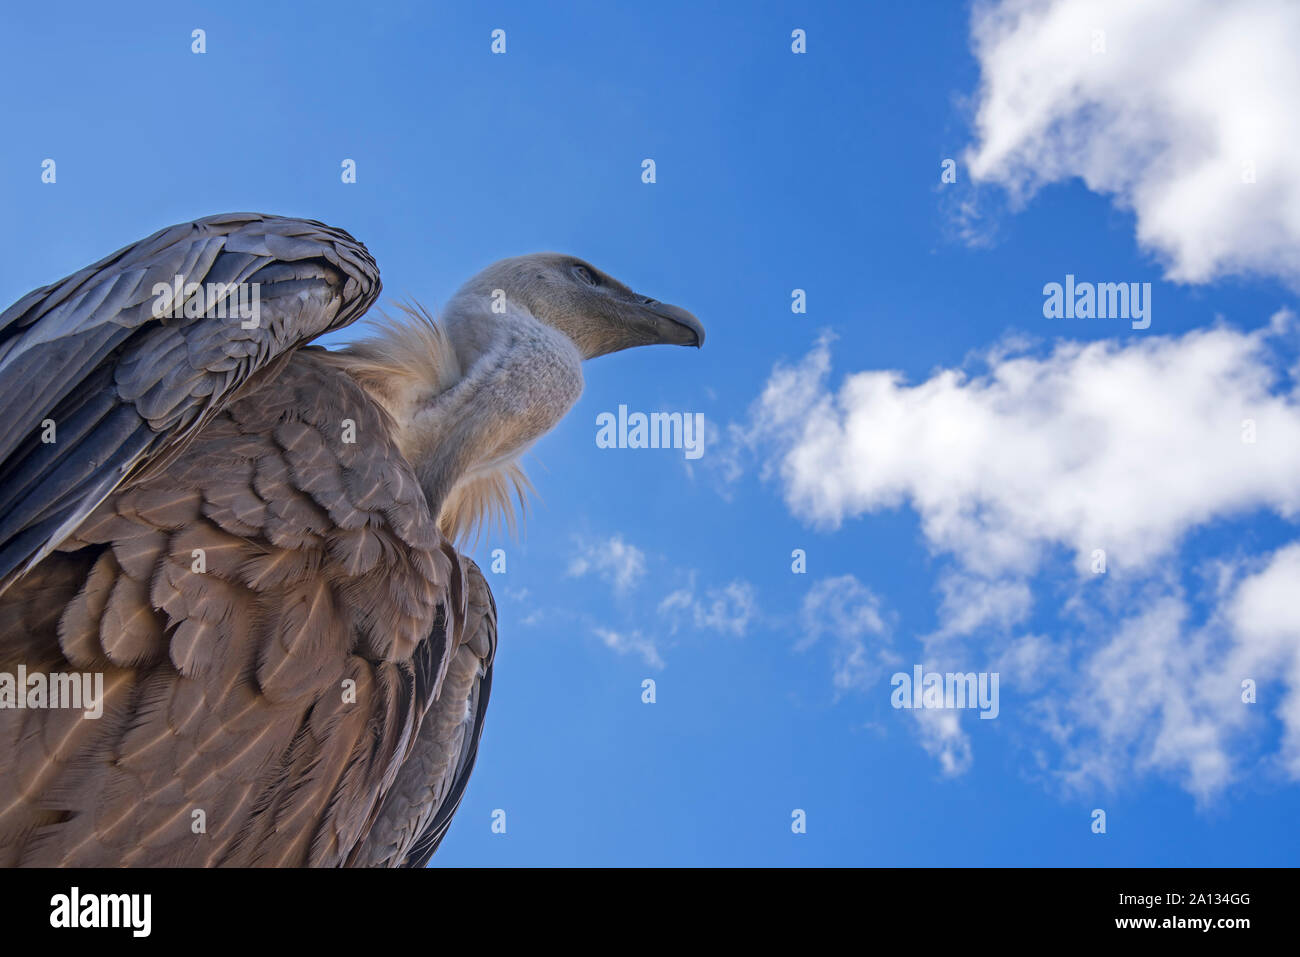 Worm's-eye view on griffon vulture (Gyps fulvus) against blue sky with white clouds Stock Photo